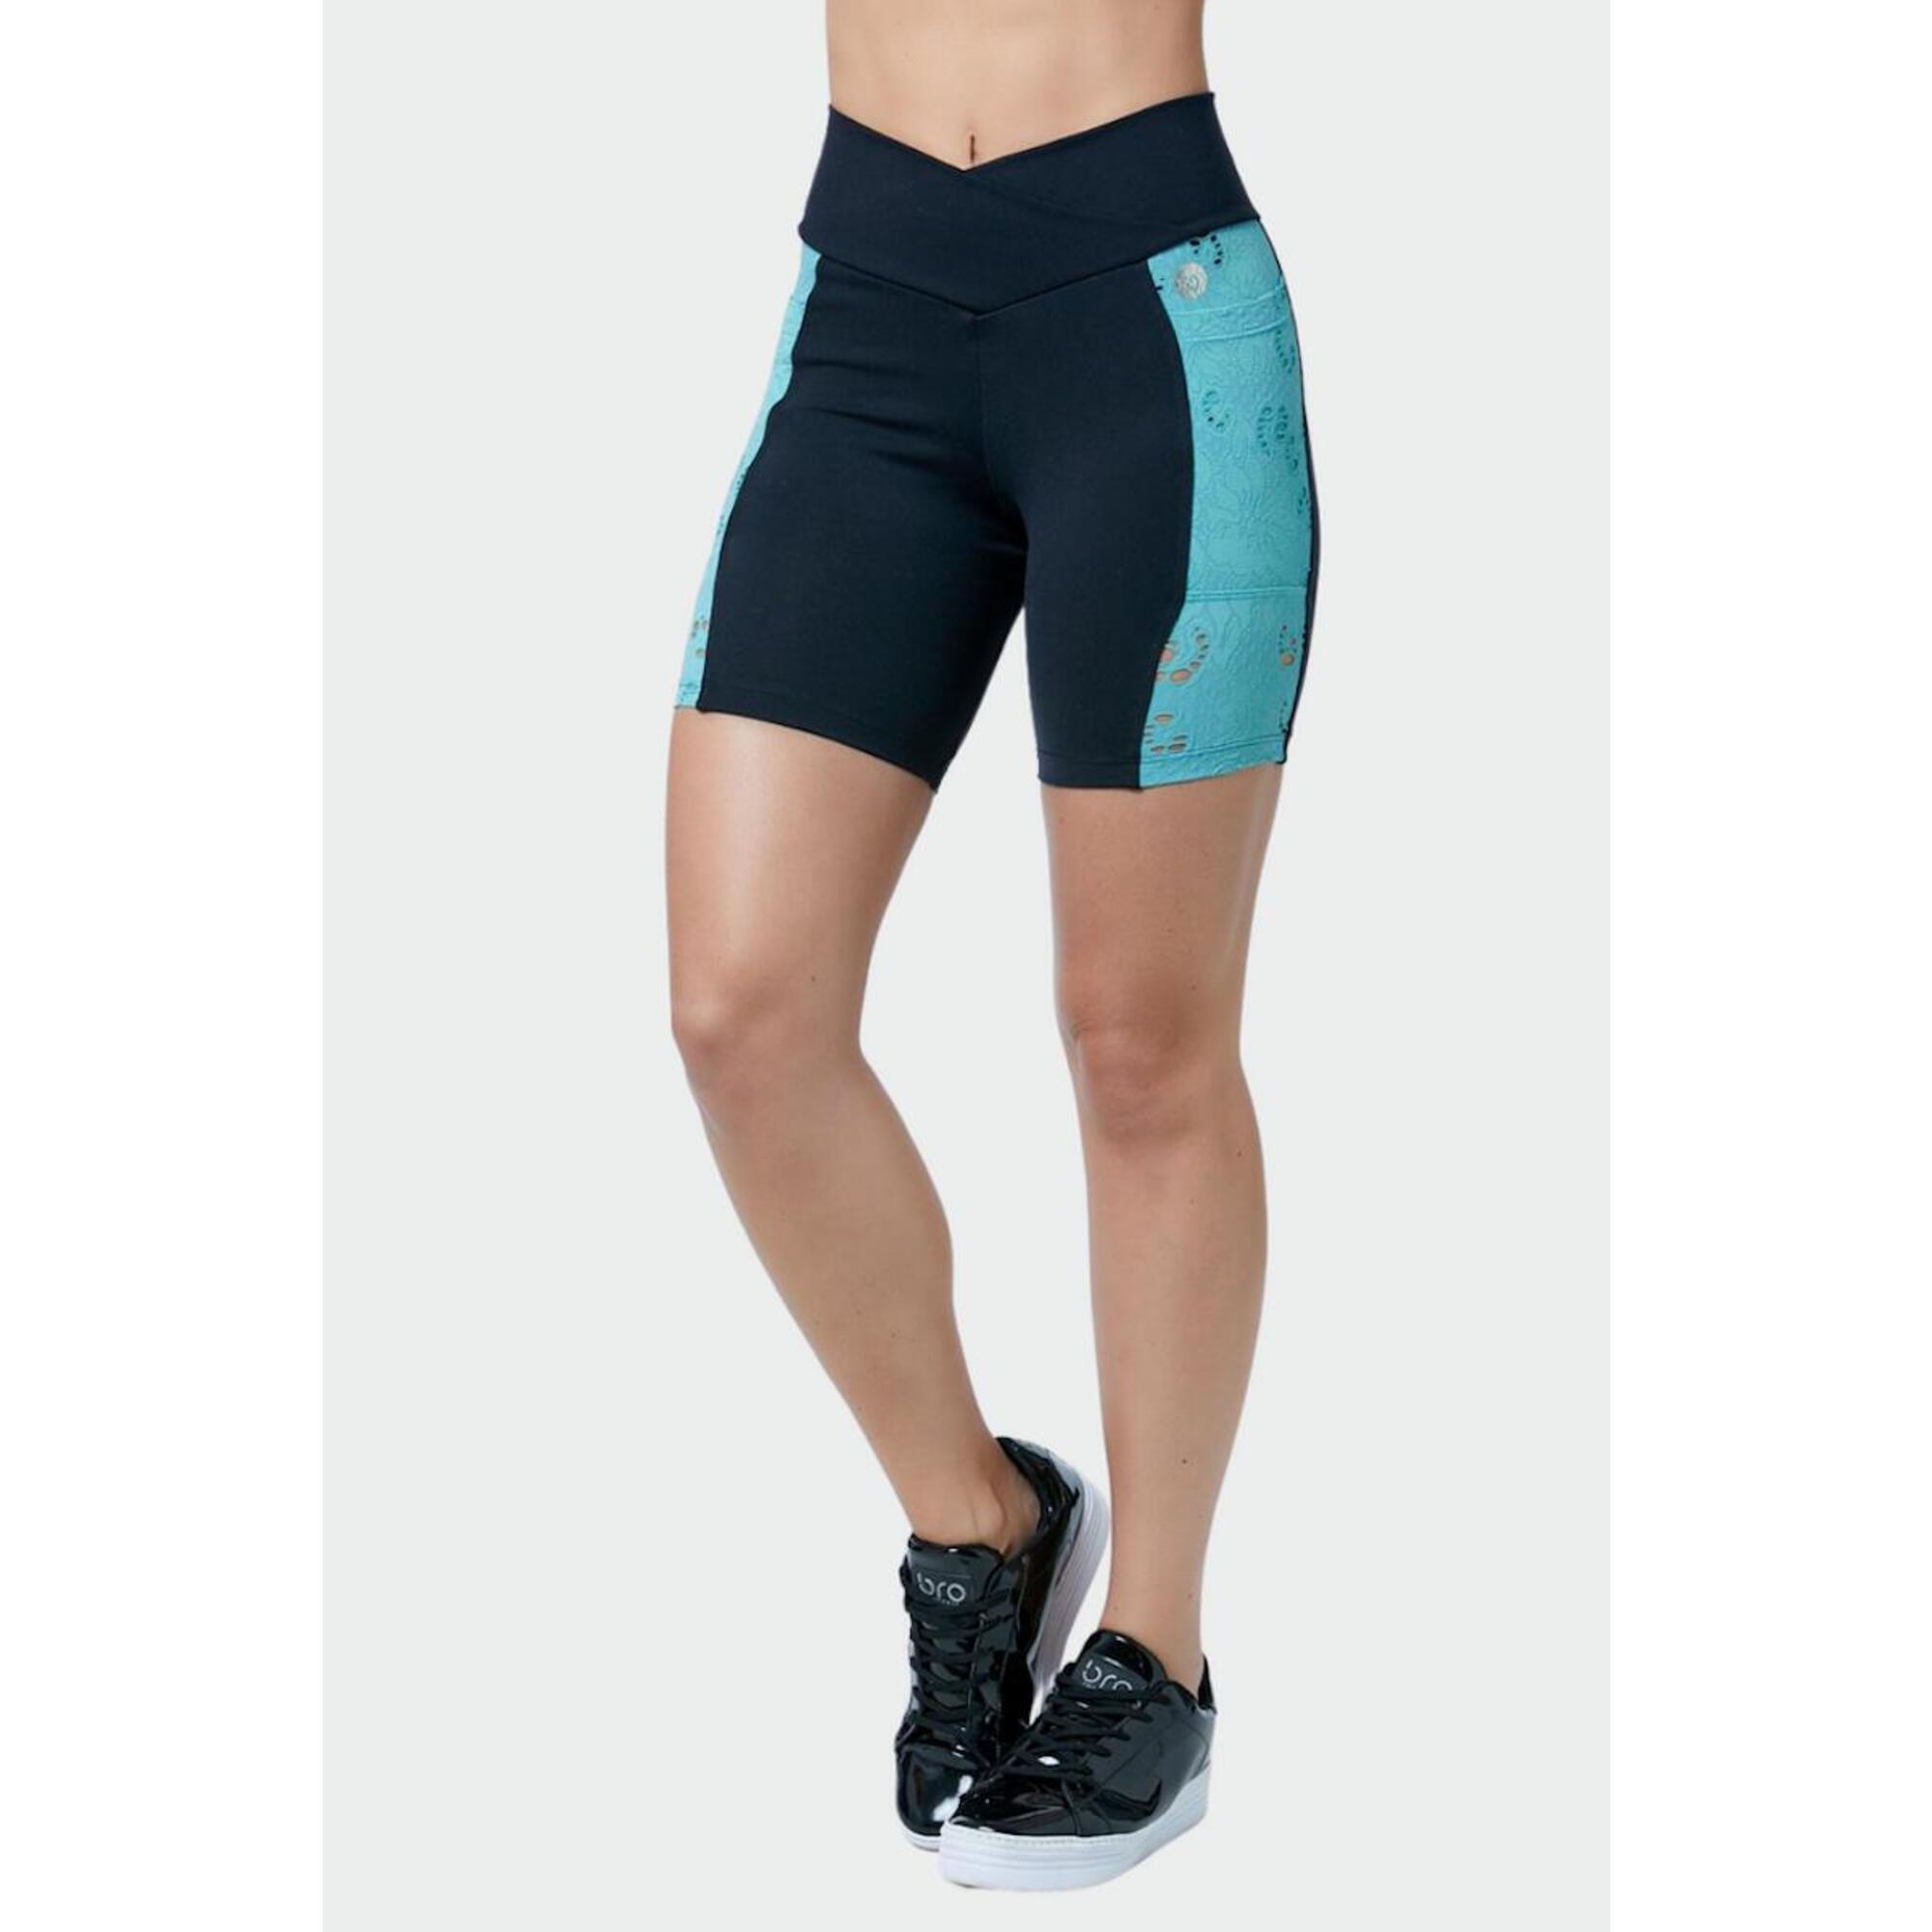 Short Fitness Femme Cardio Taille haute, Sirmione